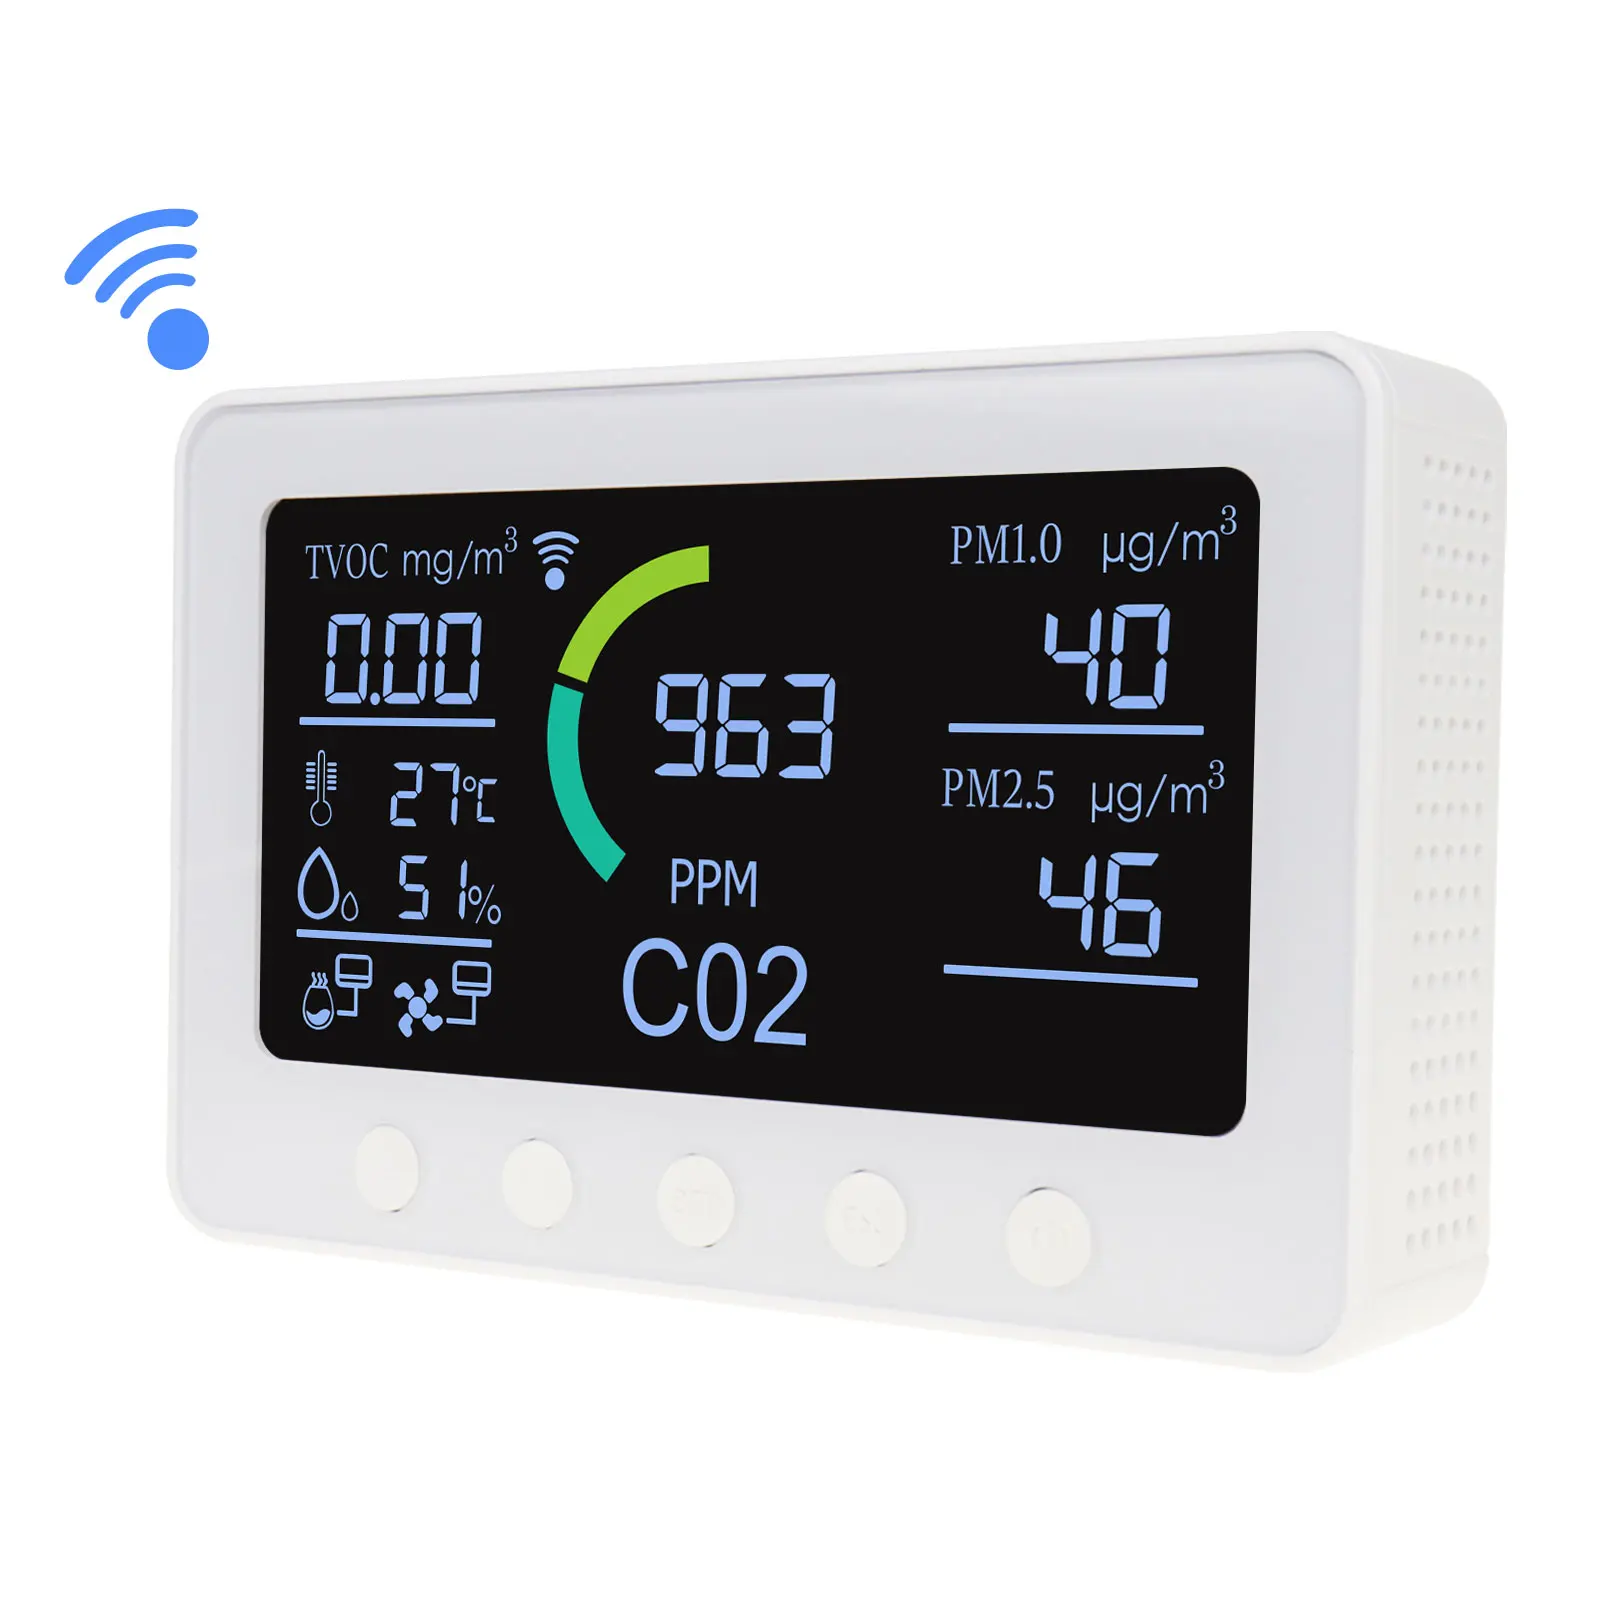 

Smart Air Detector Analyzer Air Quality Monitor CO2 Meter, TVOC, Humidity, Temperature, PM2.5, PM1.0 W/ Relay Output APP Control